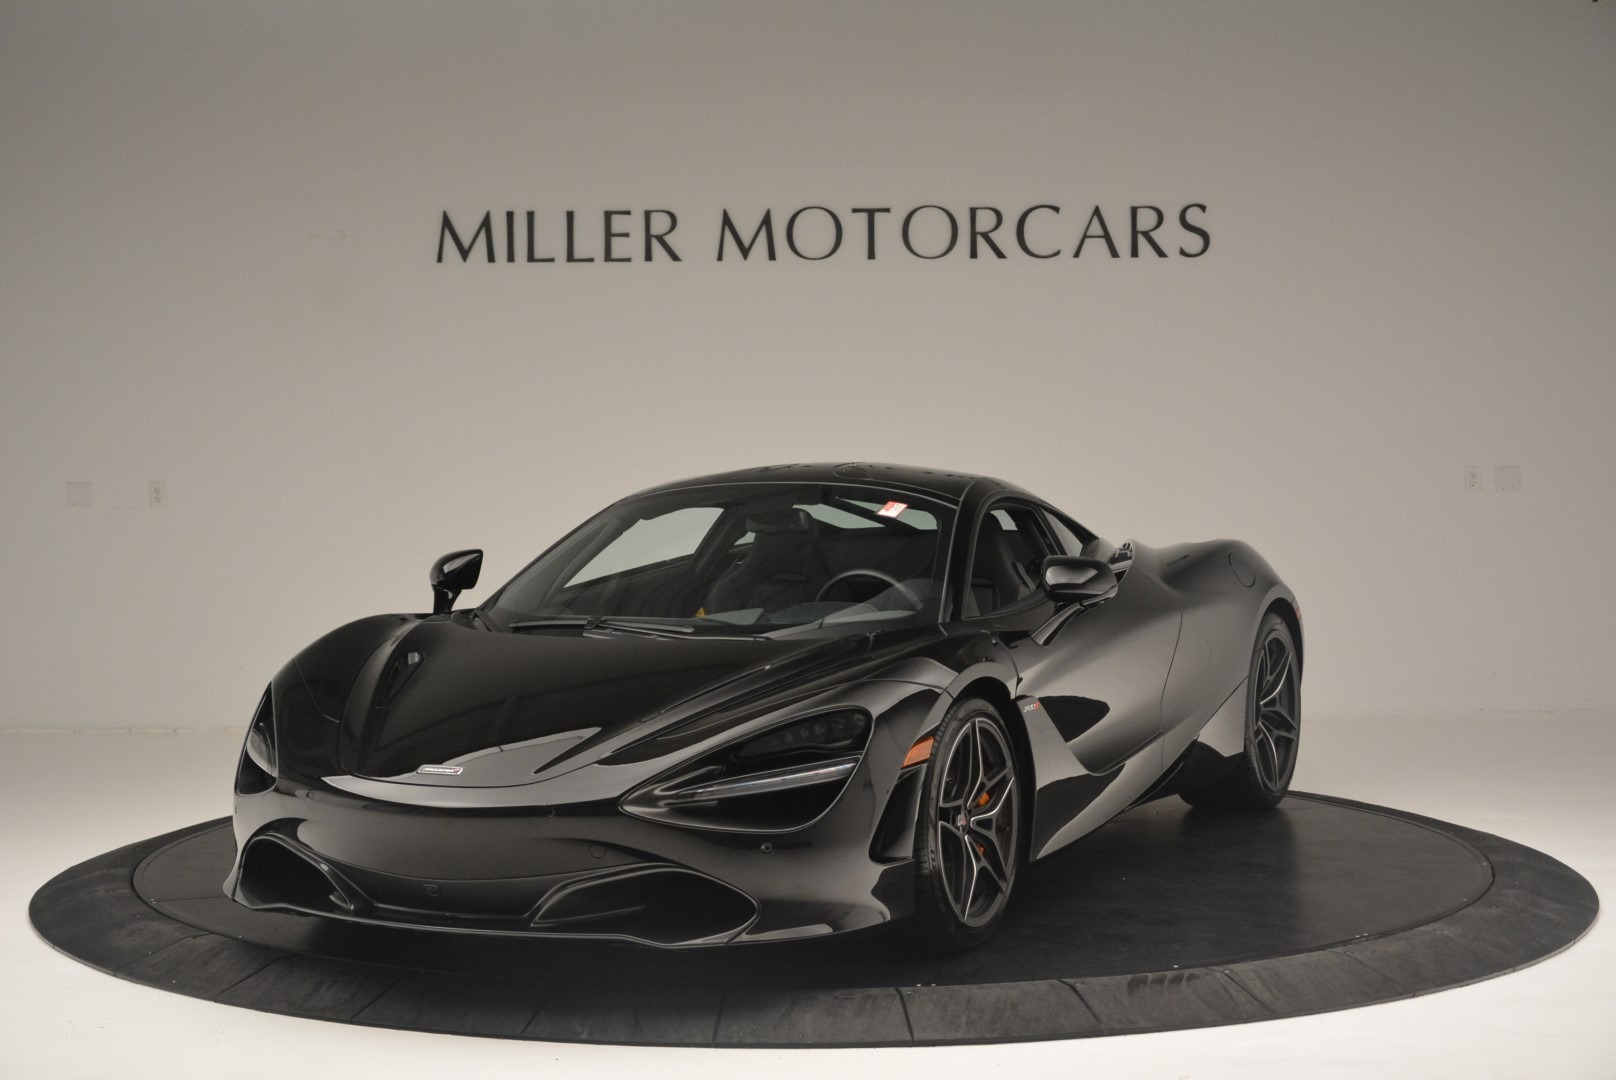 Used 2018 McLaren 720S Coupe for sale Sold at Alfa Romeo of Greenwich in Greenwich CT 06830 1